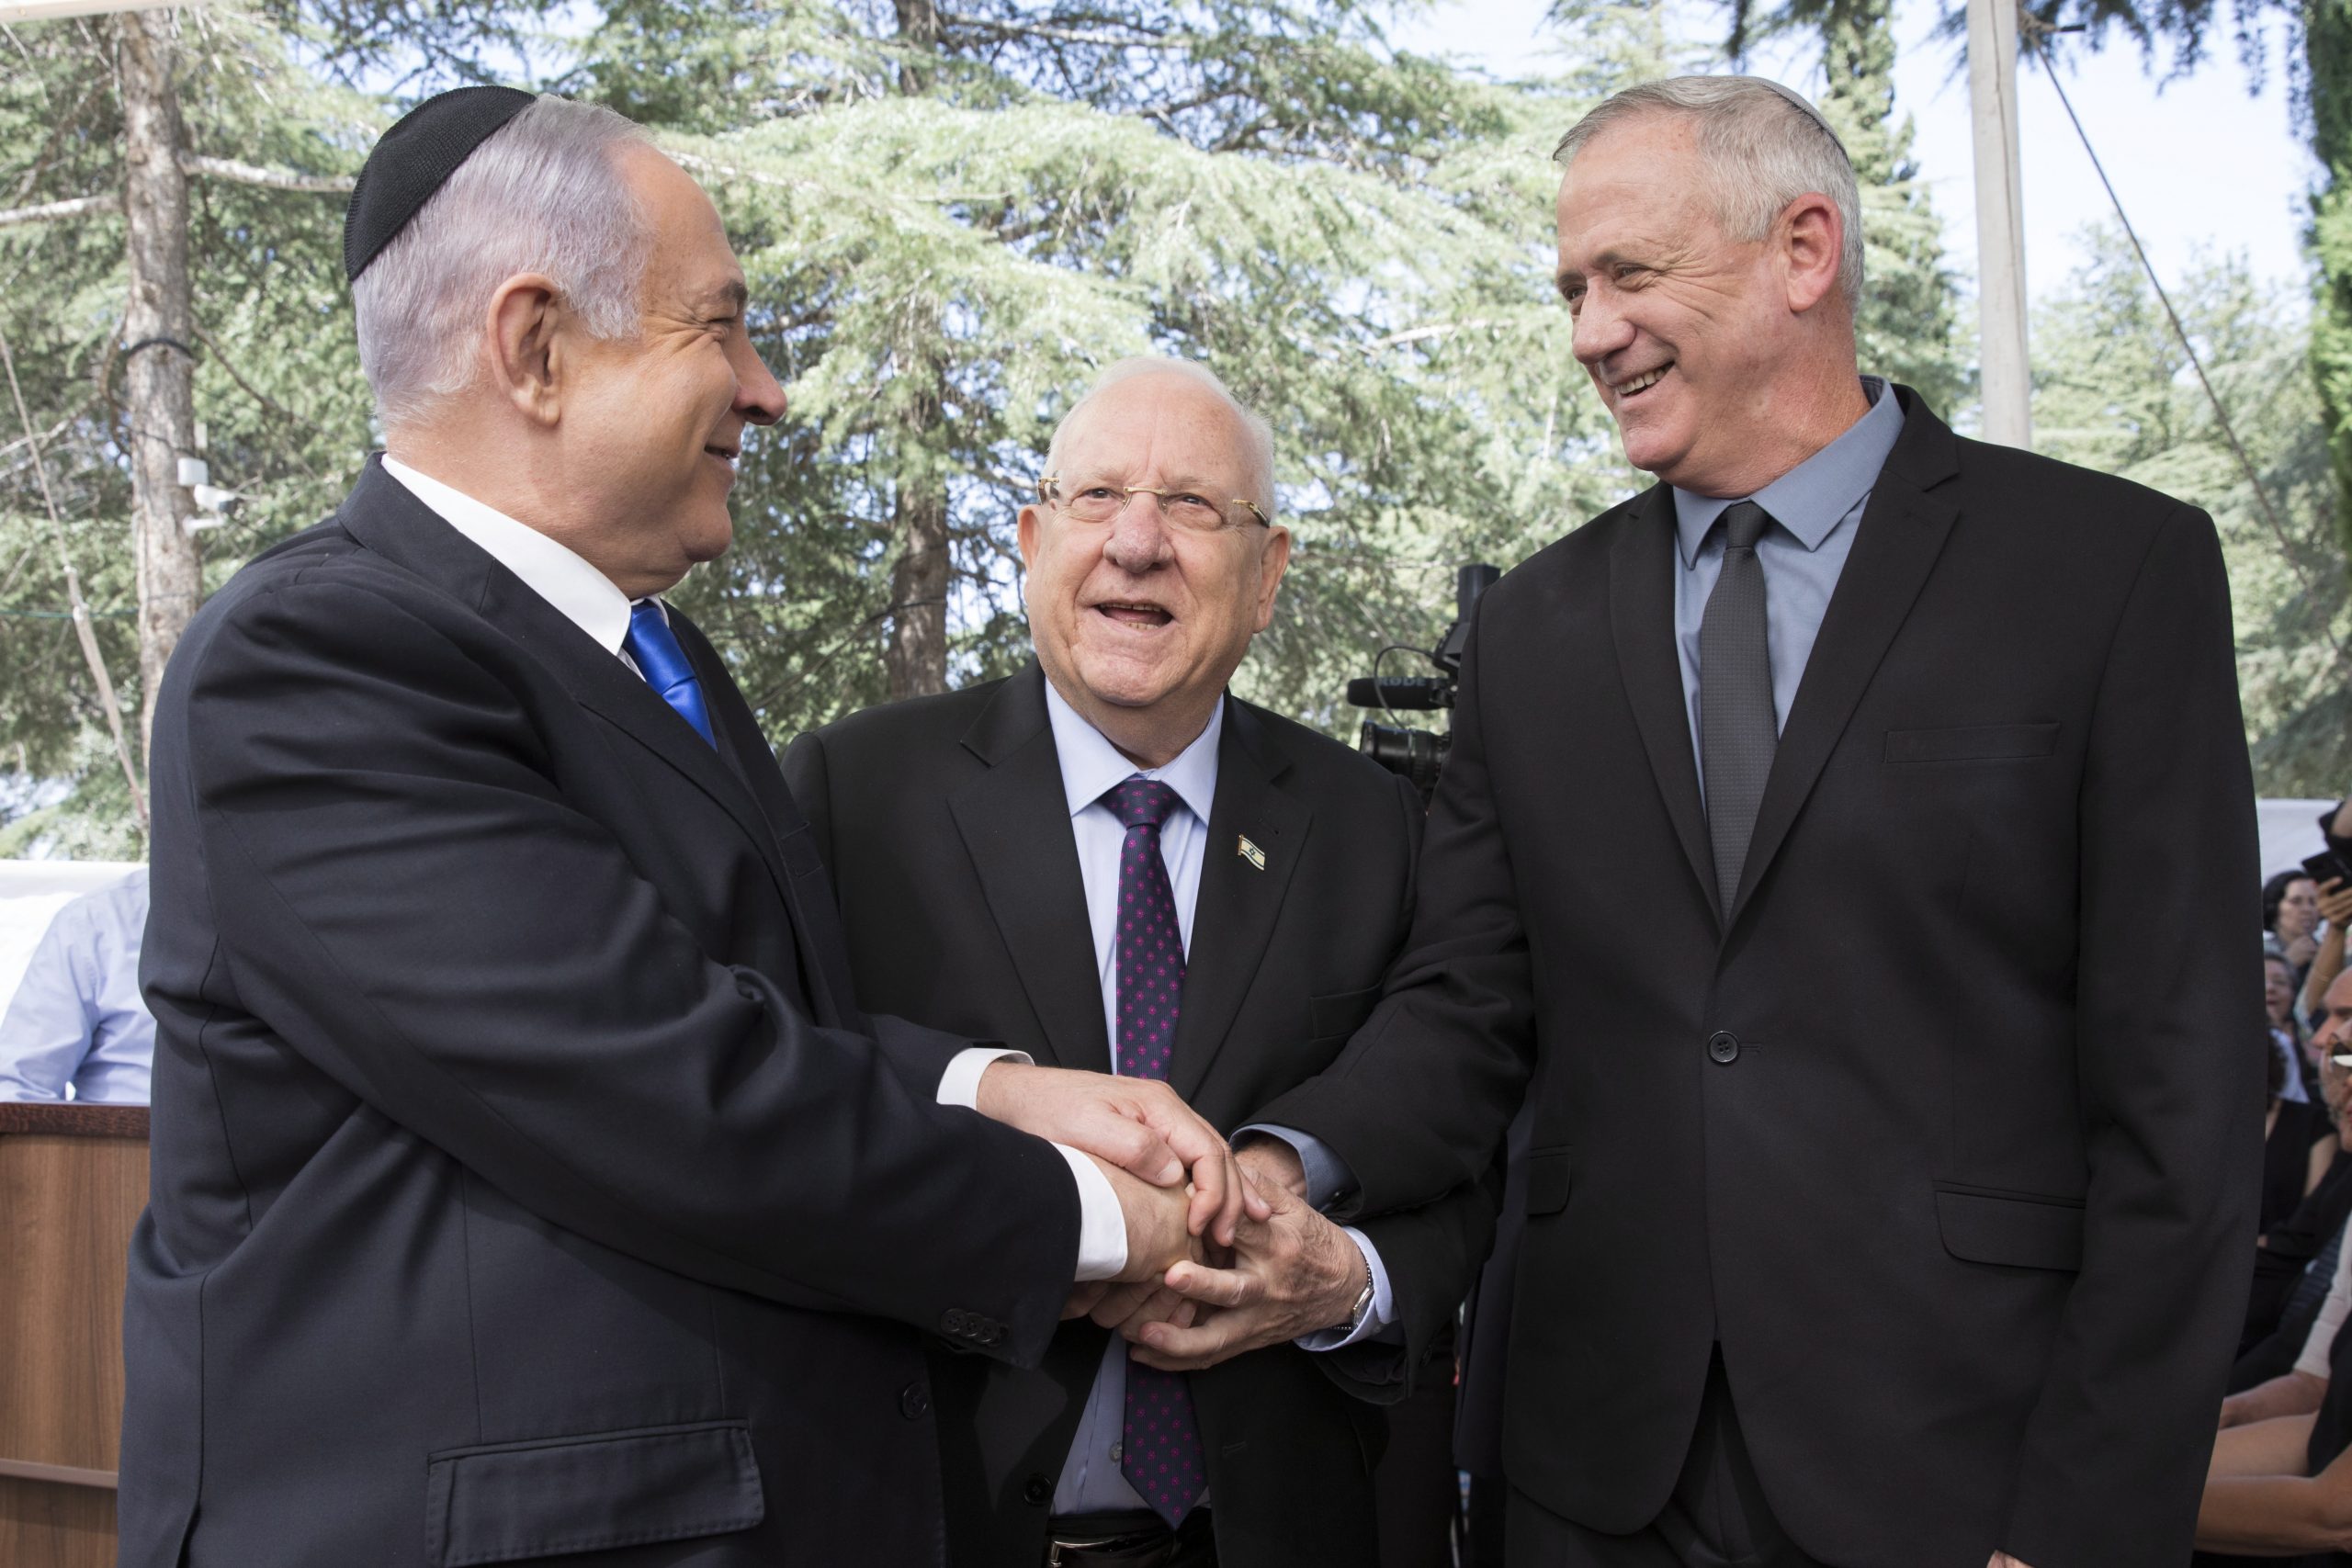 epa08373681 (FILE) -  Israeli Prime Minister Benjamin Netanyahu (L), Israeli President Reuven Rivlin (C) and Benny Gantz, former Israeli Army Chief of Staff and chairman of the Blue and White Israeli centrist political alliance (R) join hands as they attend a memorial service for late Israeli president Shimon Peres at Mount Herzl in Jerusalem, 19 September 2019(issued 04 April 2020). Media report that Netanyahu  and Gantz agreed to sign a coalition deal to form a government after three elections and to rotate the premiership.  EPA/ABIR SULTAN